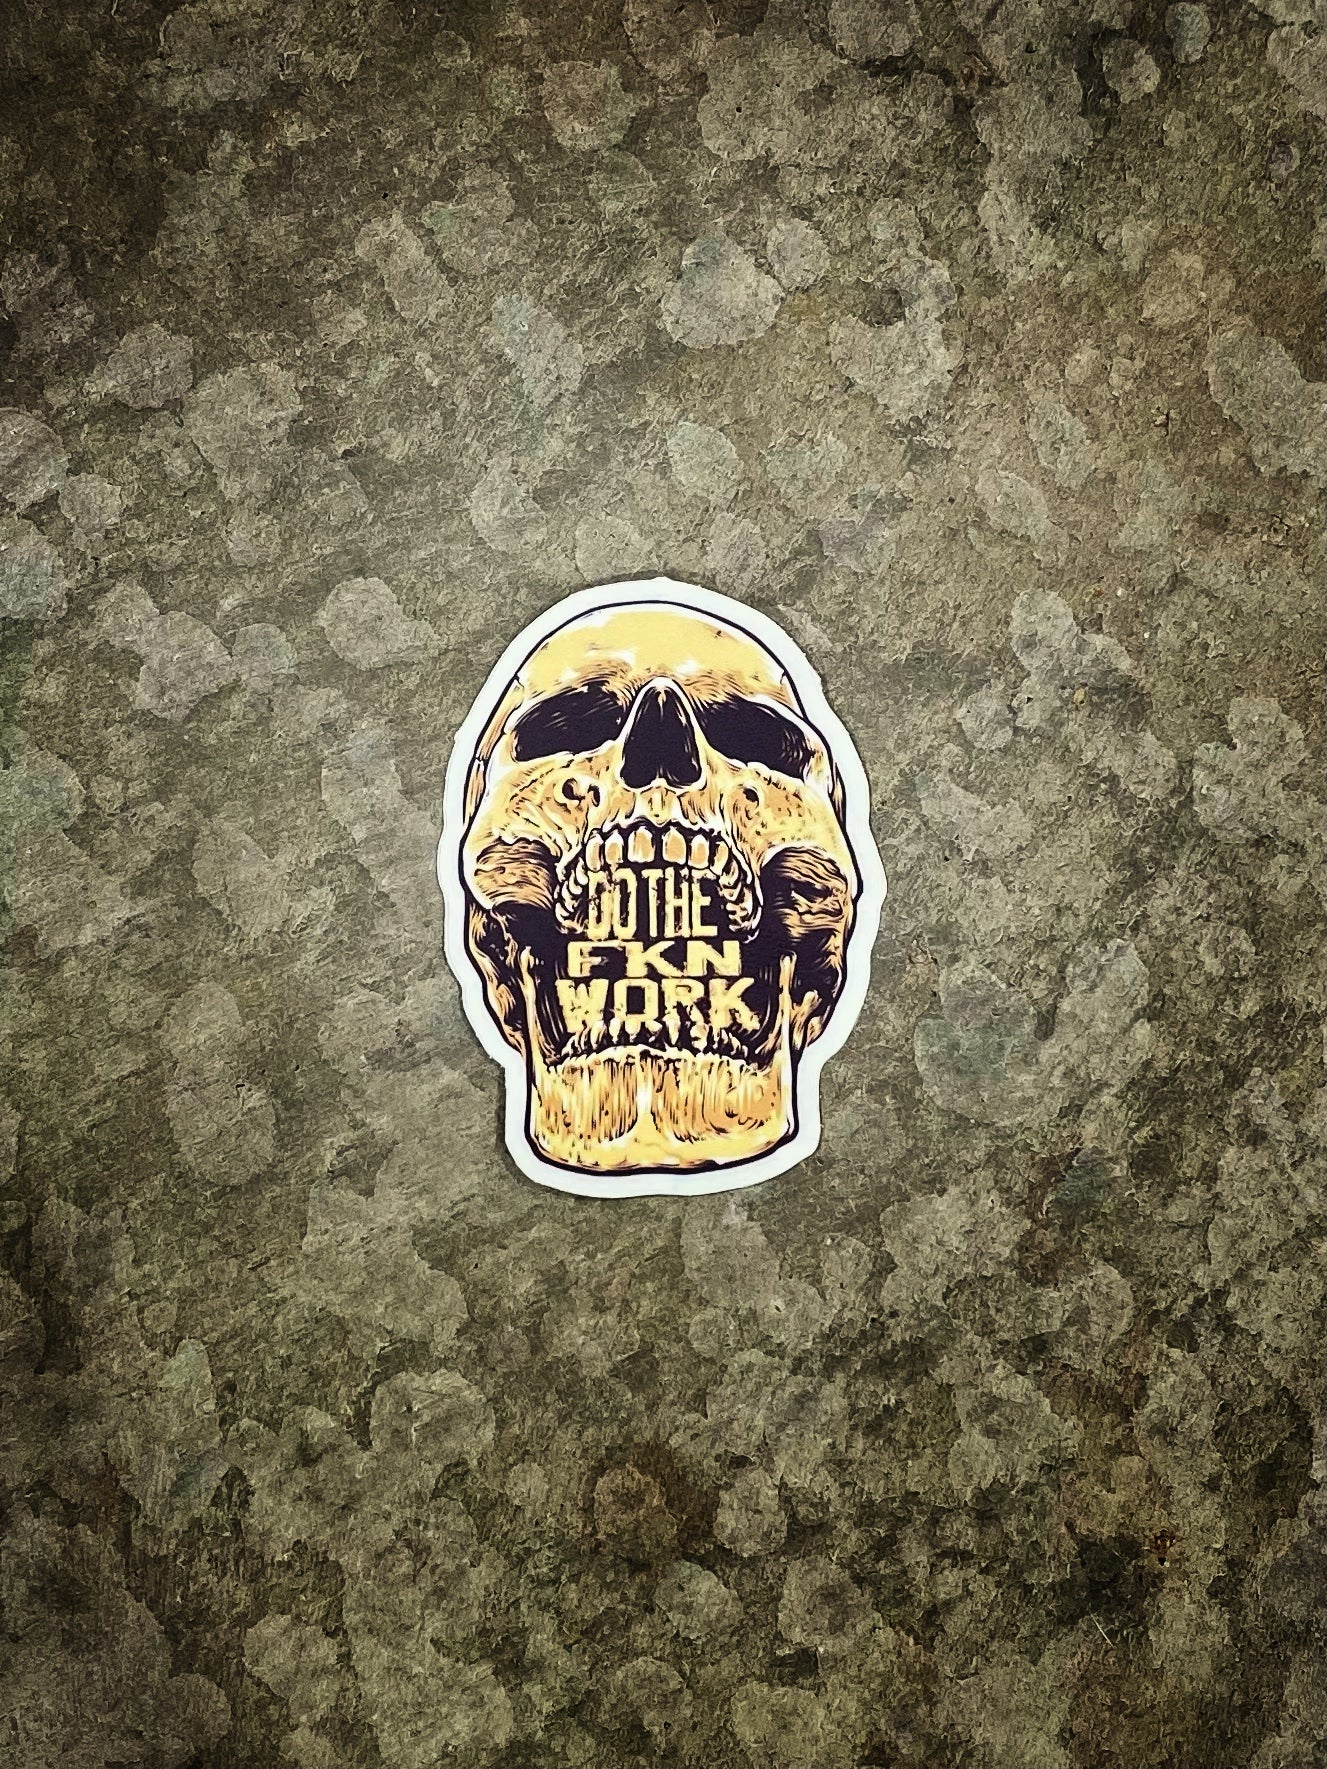 DTFW SKULL STICKER - Dude That Lifts